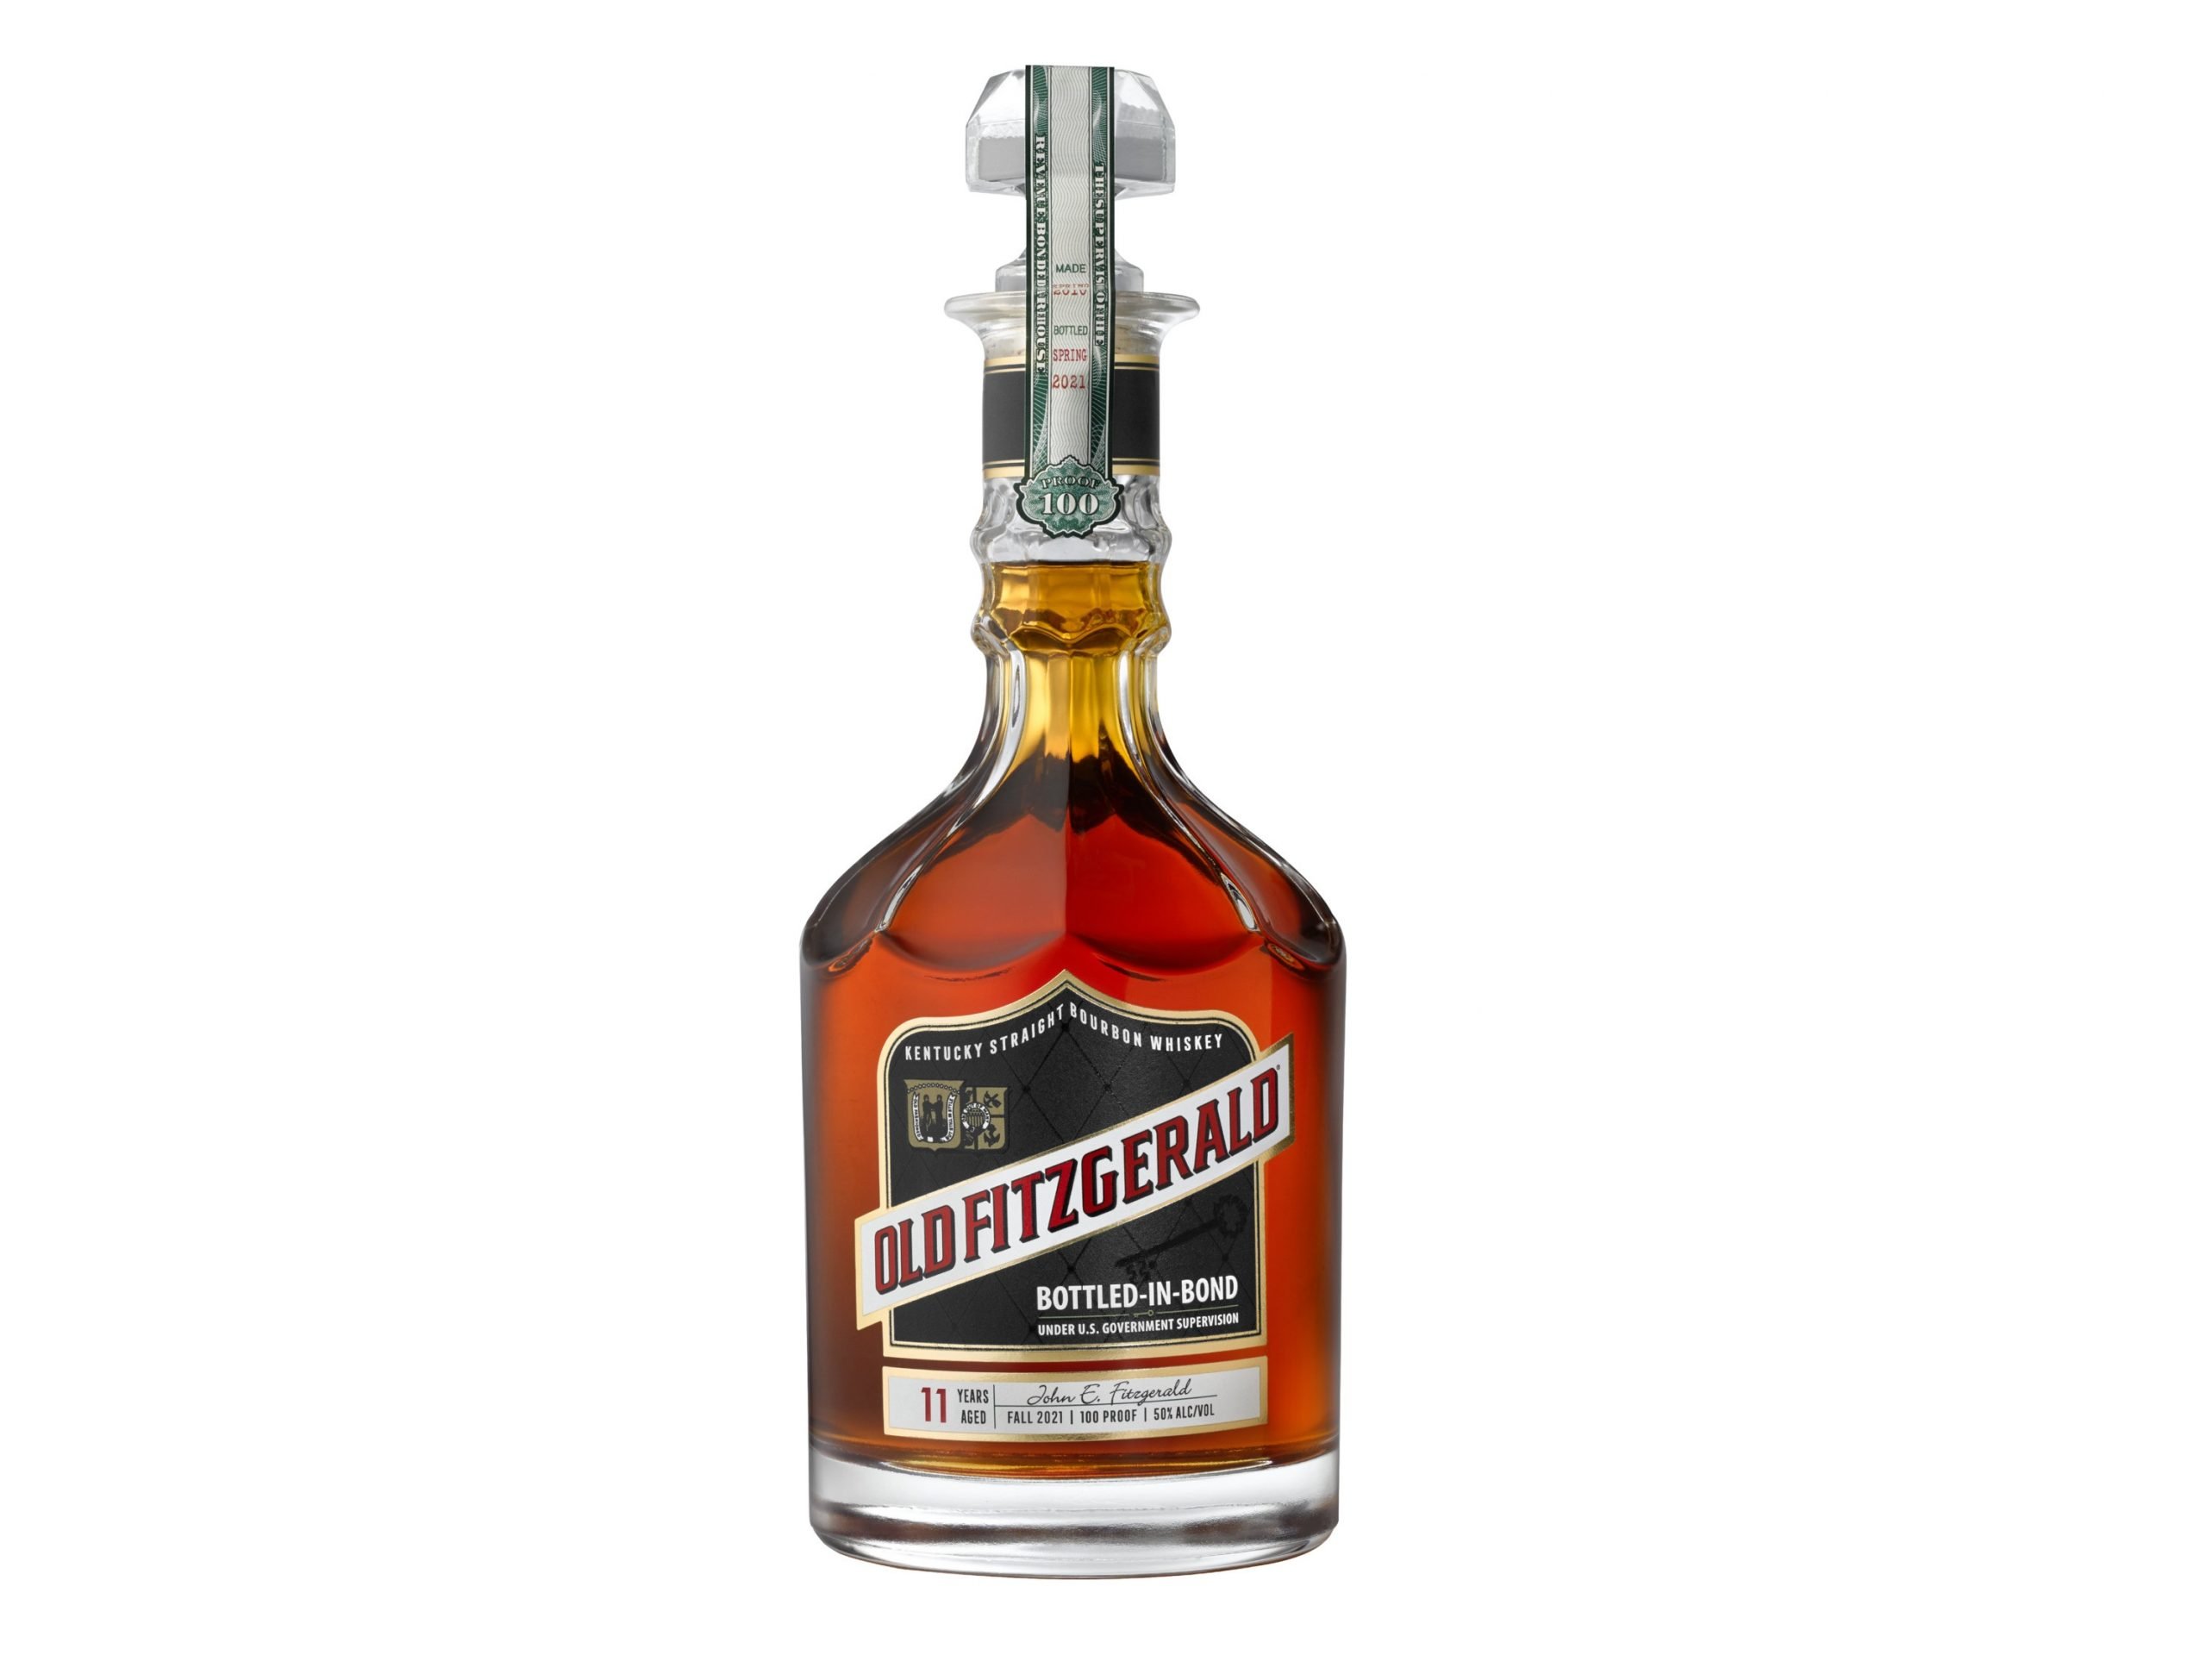 Old Fitzgerald Bottled-in-Bond 17 Years Old Spring 2022 Edition